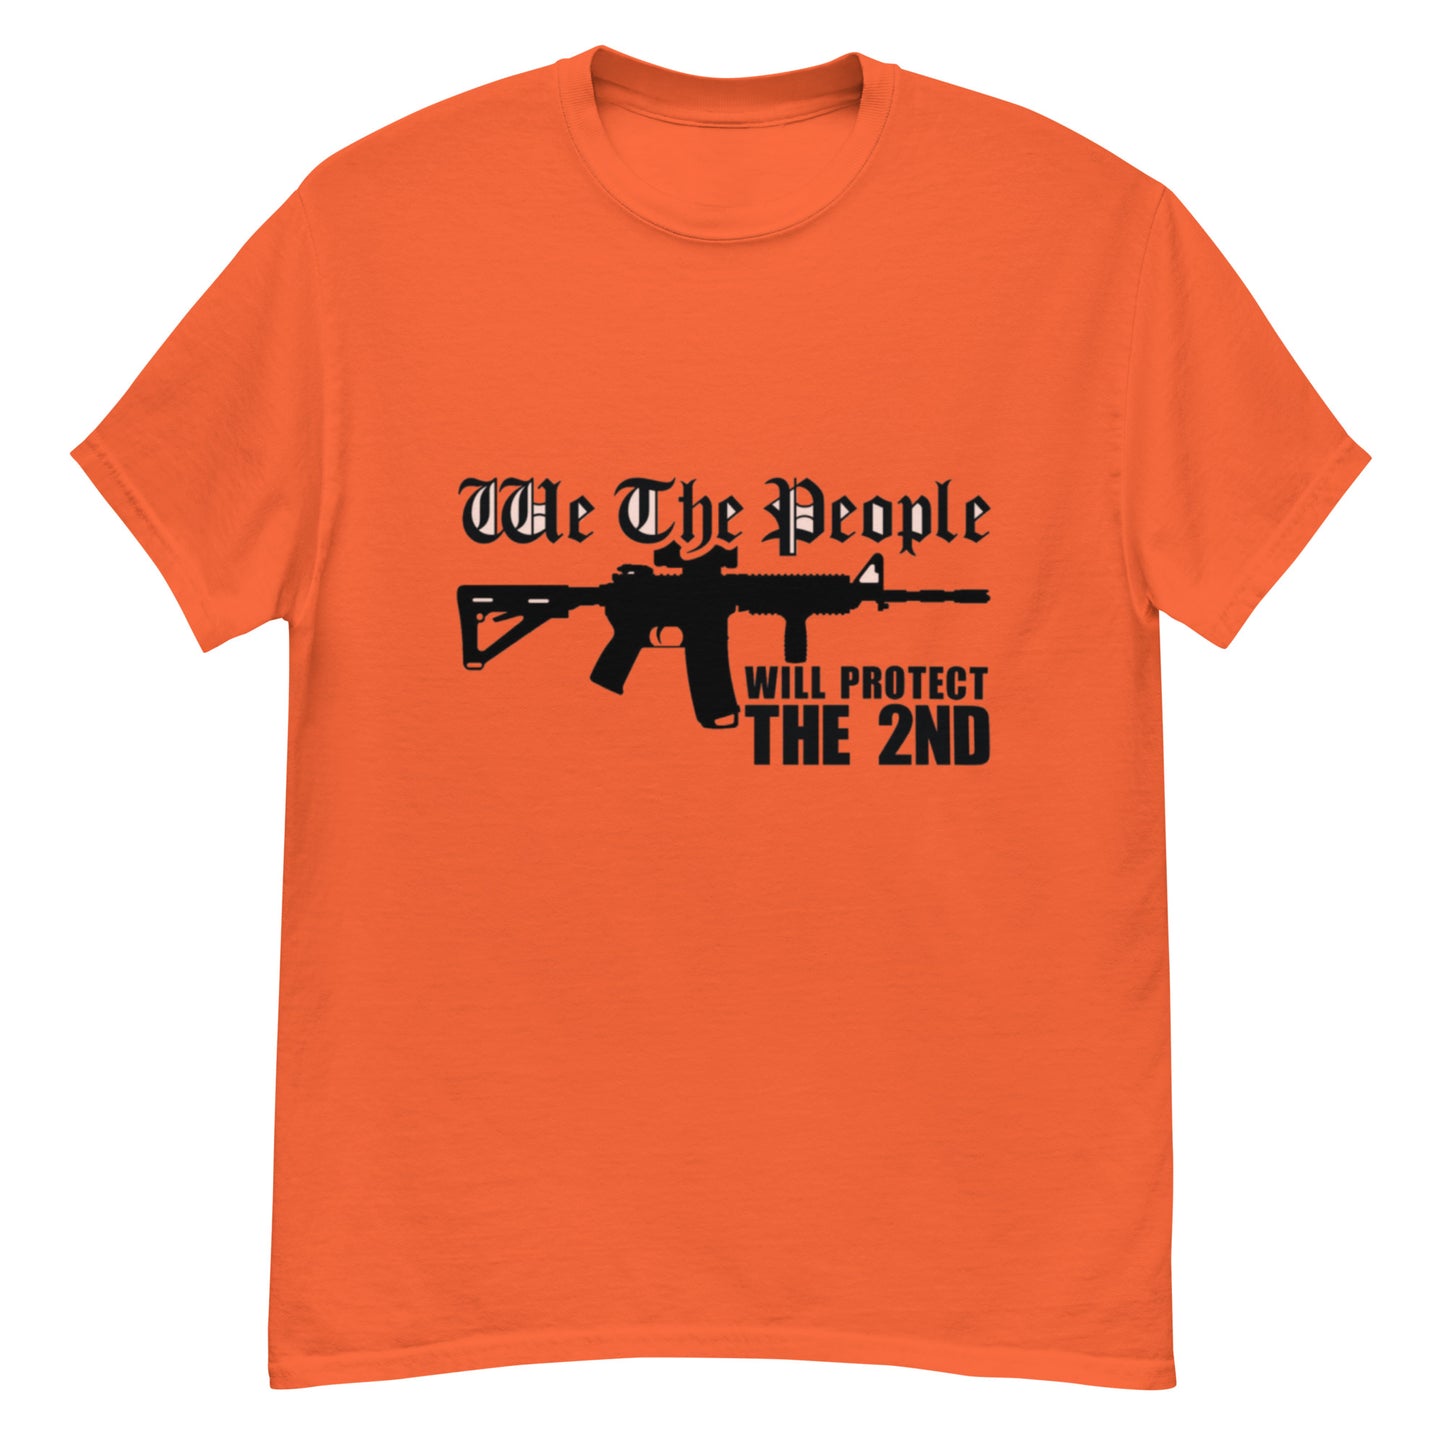 We The People will protect the 2nd - Unisex t-shirt